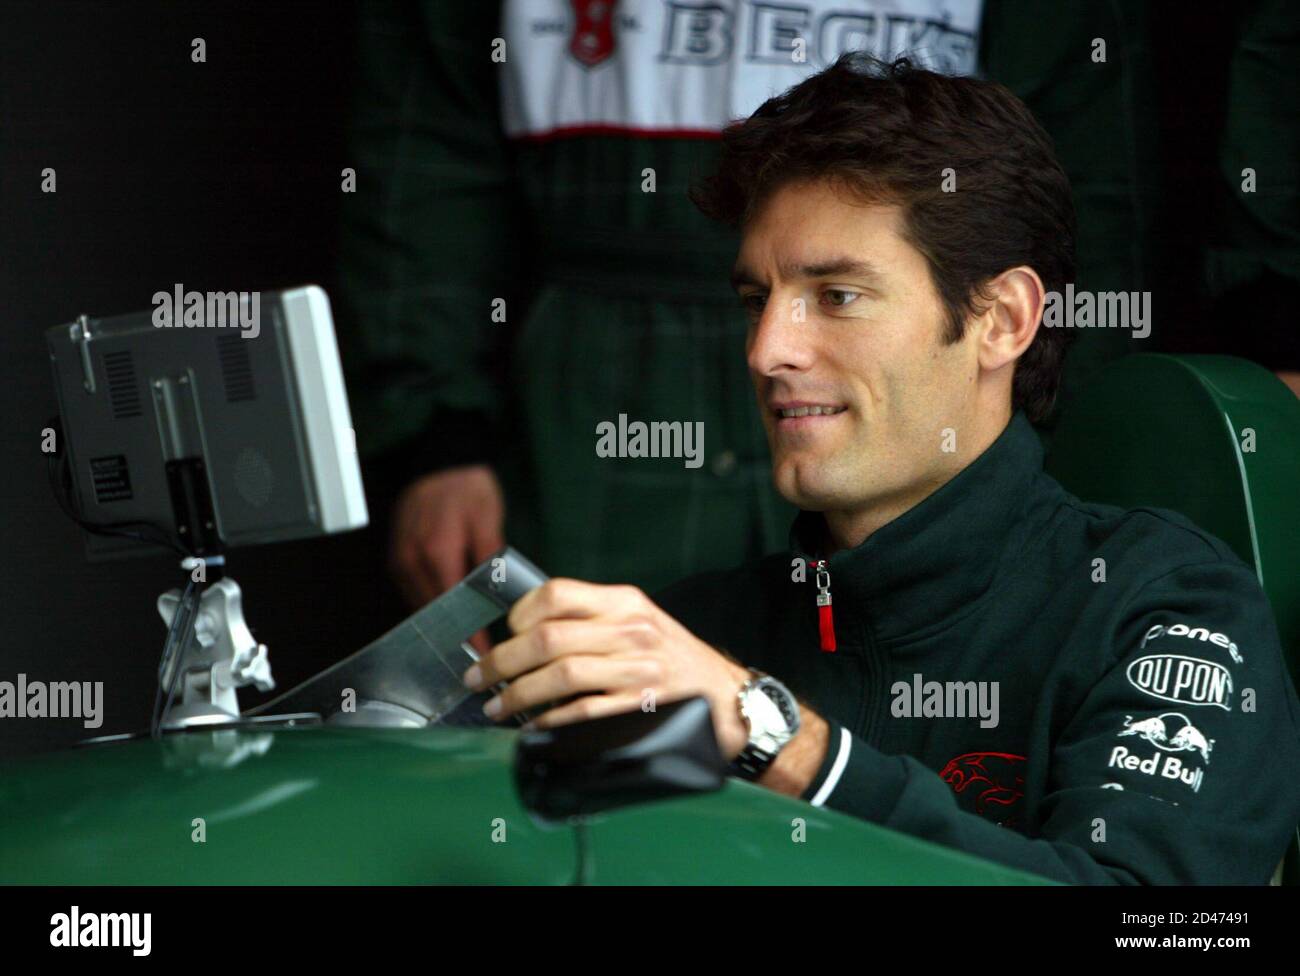 AUSTRALIAN FORMULA ONE DRIVER MARK WEBBER RACES IN A SIMULATOR DURING A VISIT TO SABANCI UNIVERSITY IN ISTANBUL.  Australian Formula One driver Mark Webber sits in a simulator to race with university students during a visit to Sabanci University in Istanbul April 28, 2004. Webber was in Turkey to promote F1 races expected to be held in the city next year. REUTERS/Fatih Saribas Stock Photo